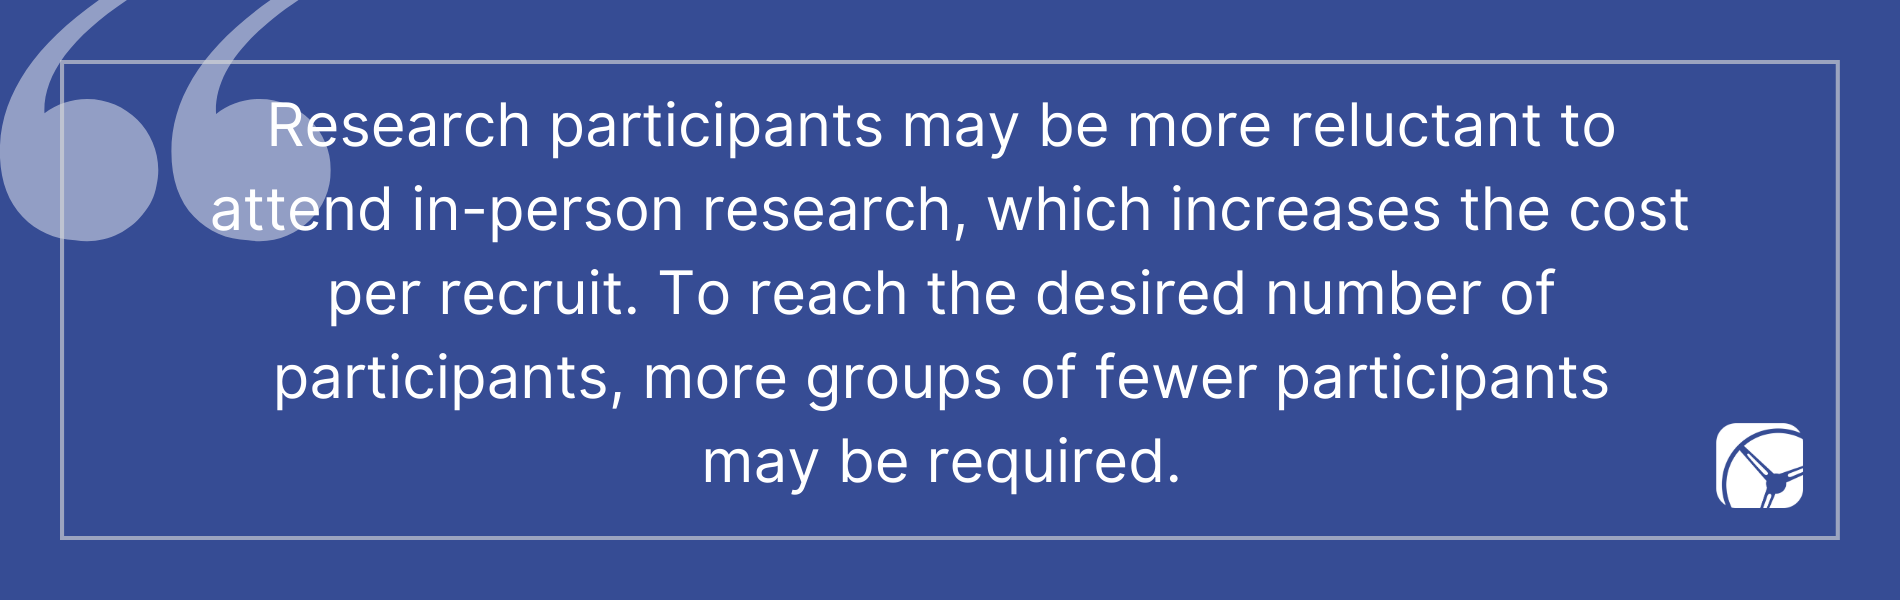 Research participants may be more reluctant to  attend in-person research, which increases the cost per recruit. To reach the desired number of  participants, more groups of fewer participants  may be required.